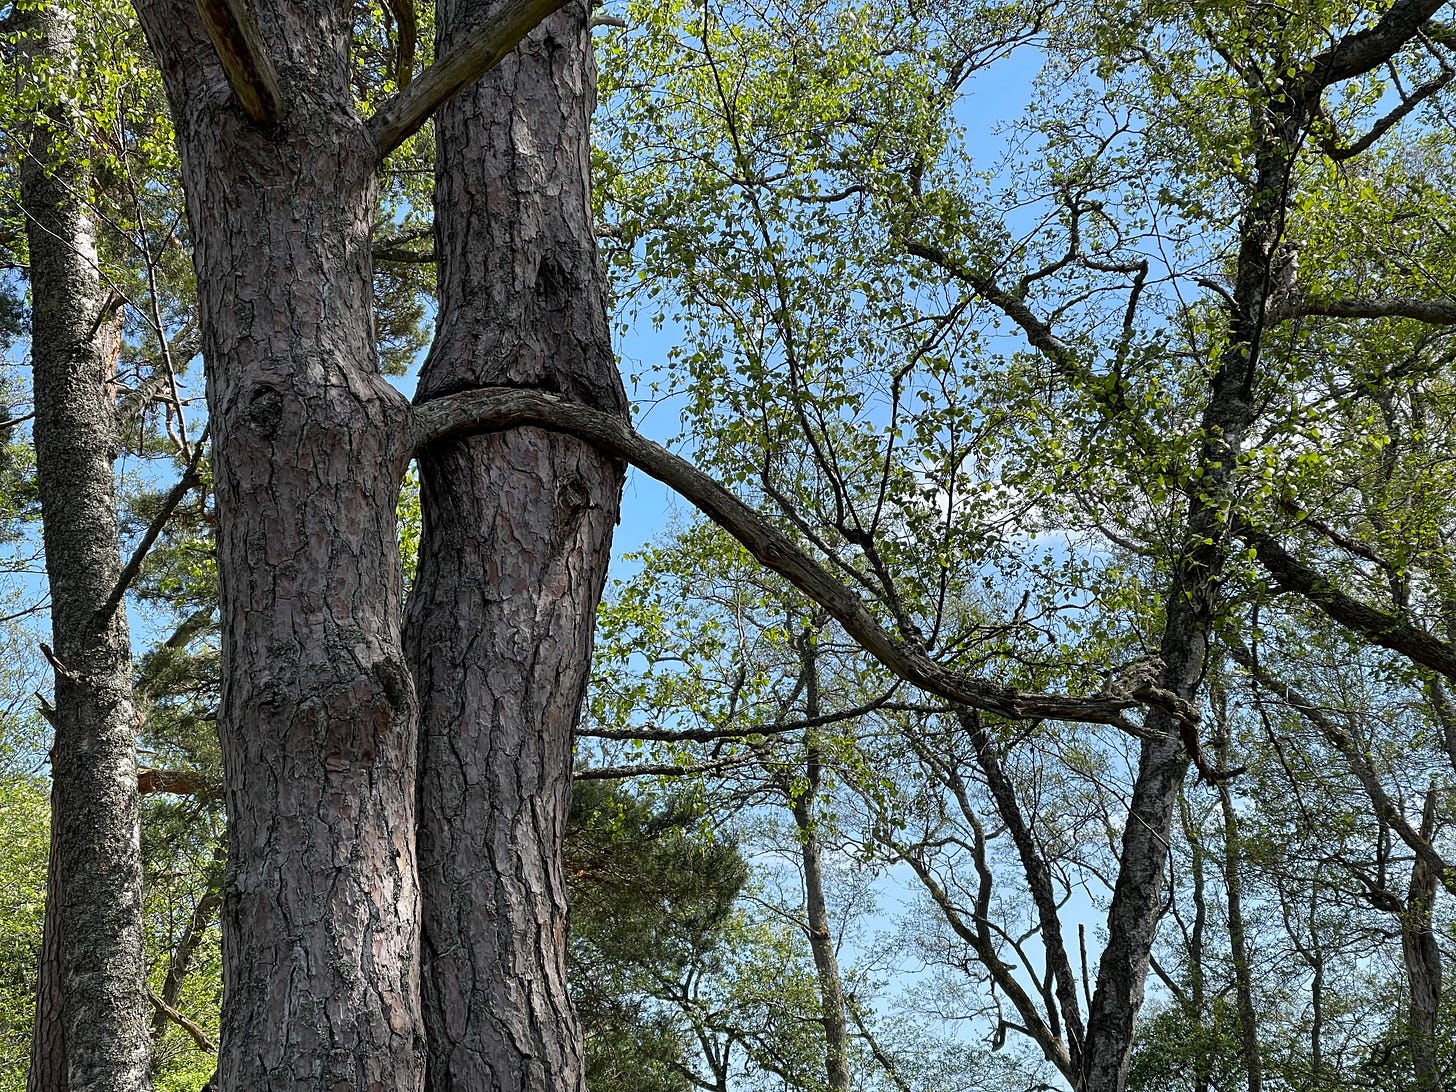 two trees growing close together with one grown around the other's branch